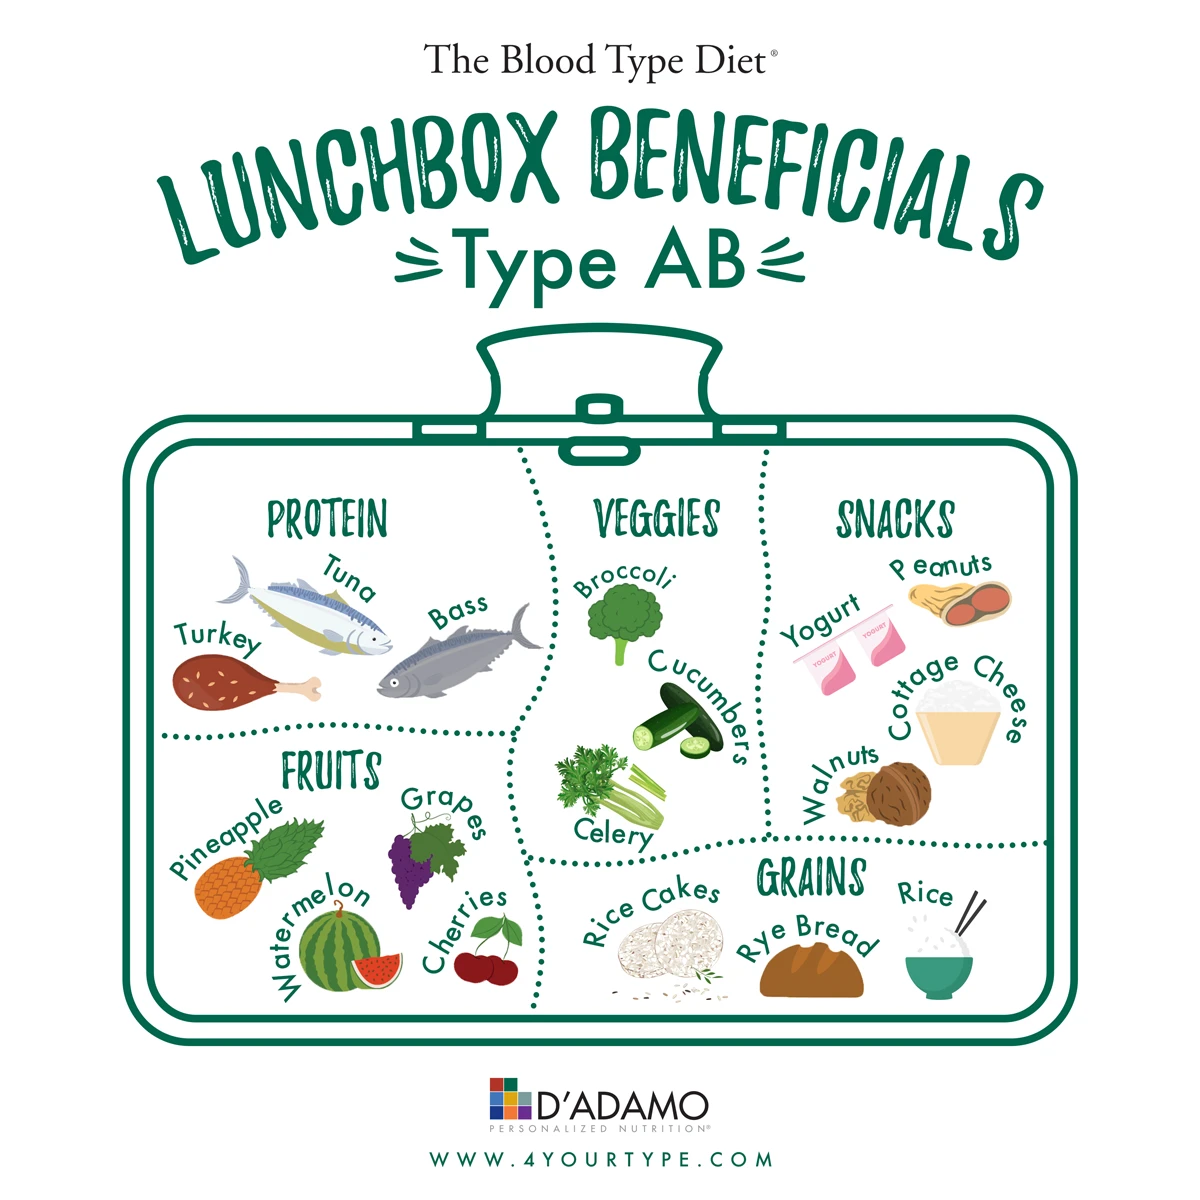 Lunchbox Beneficials Blood Type AB